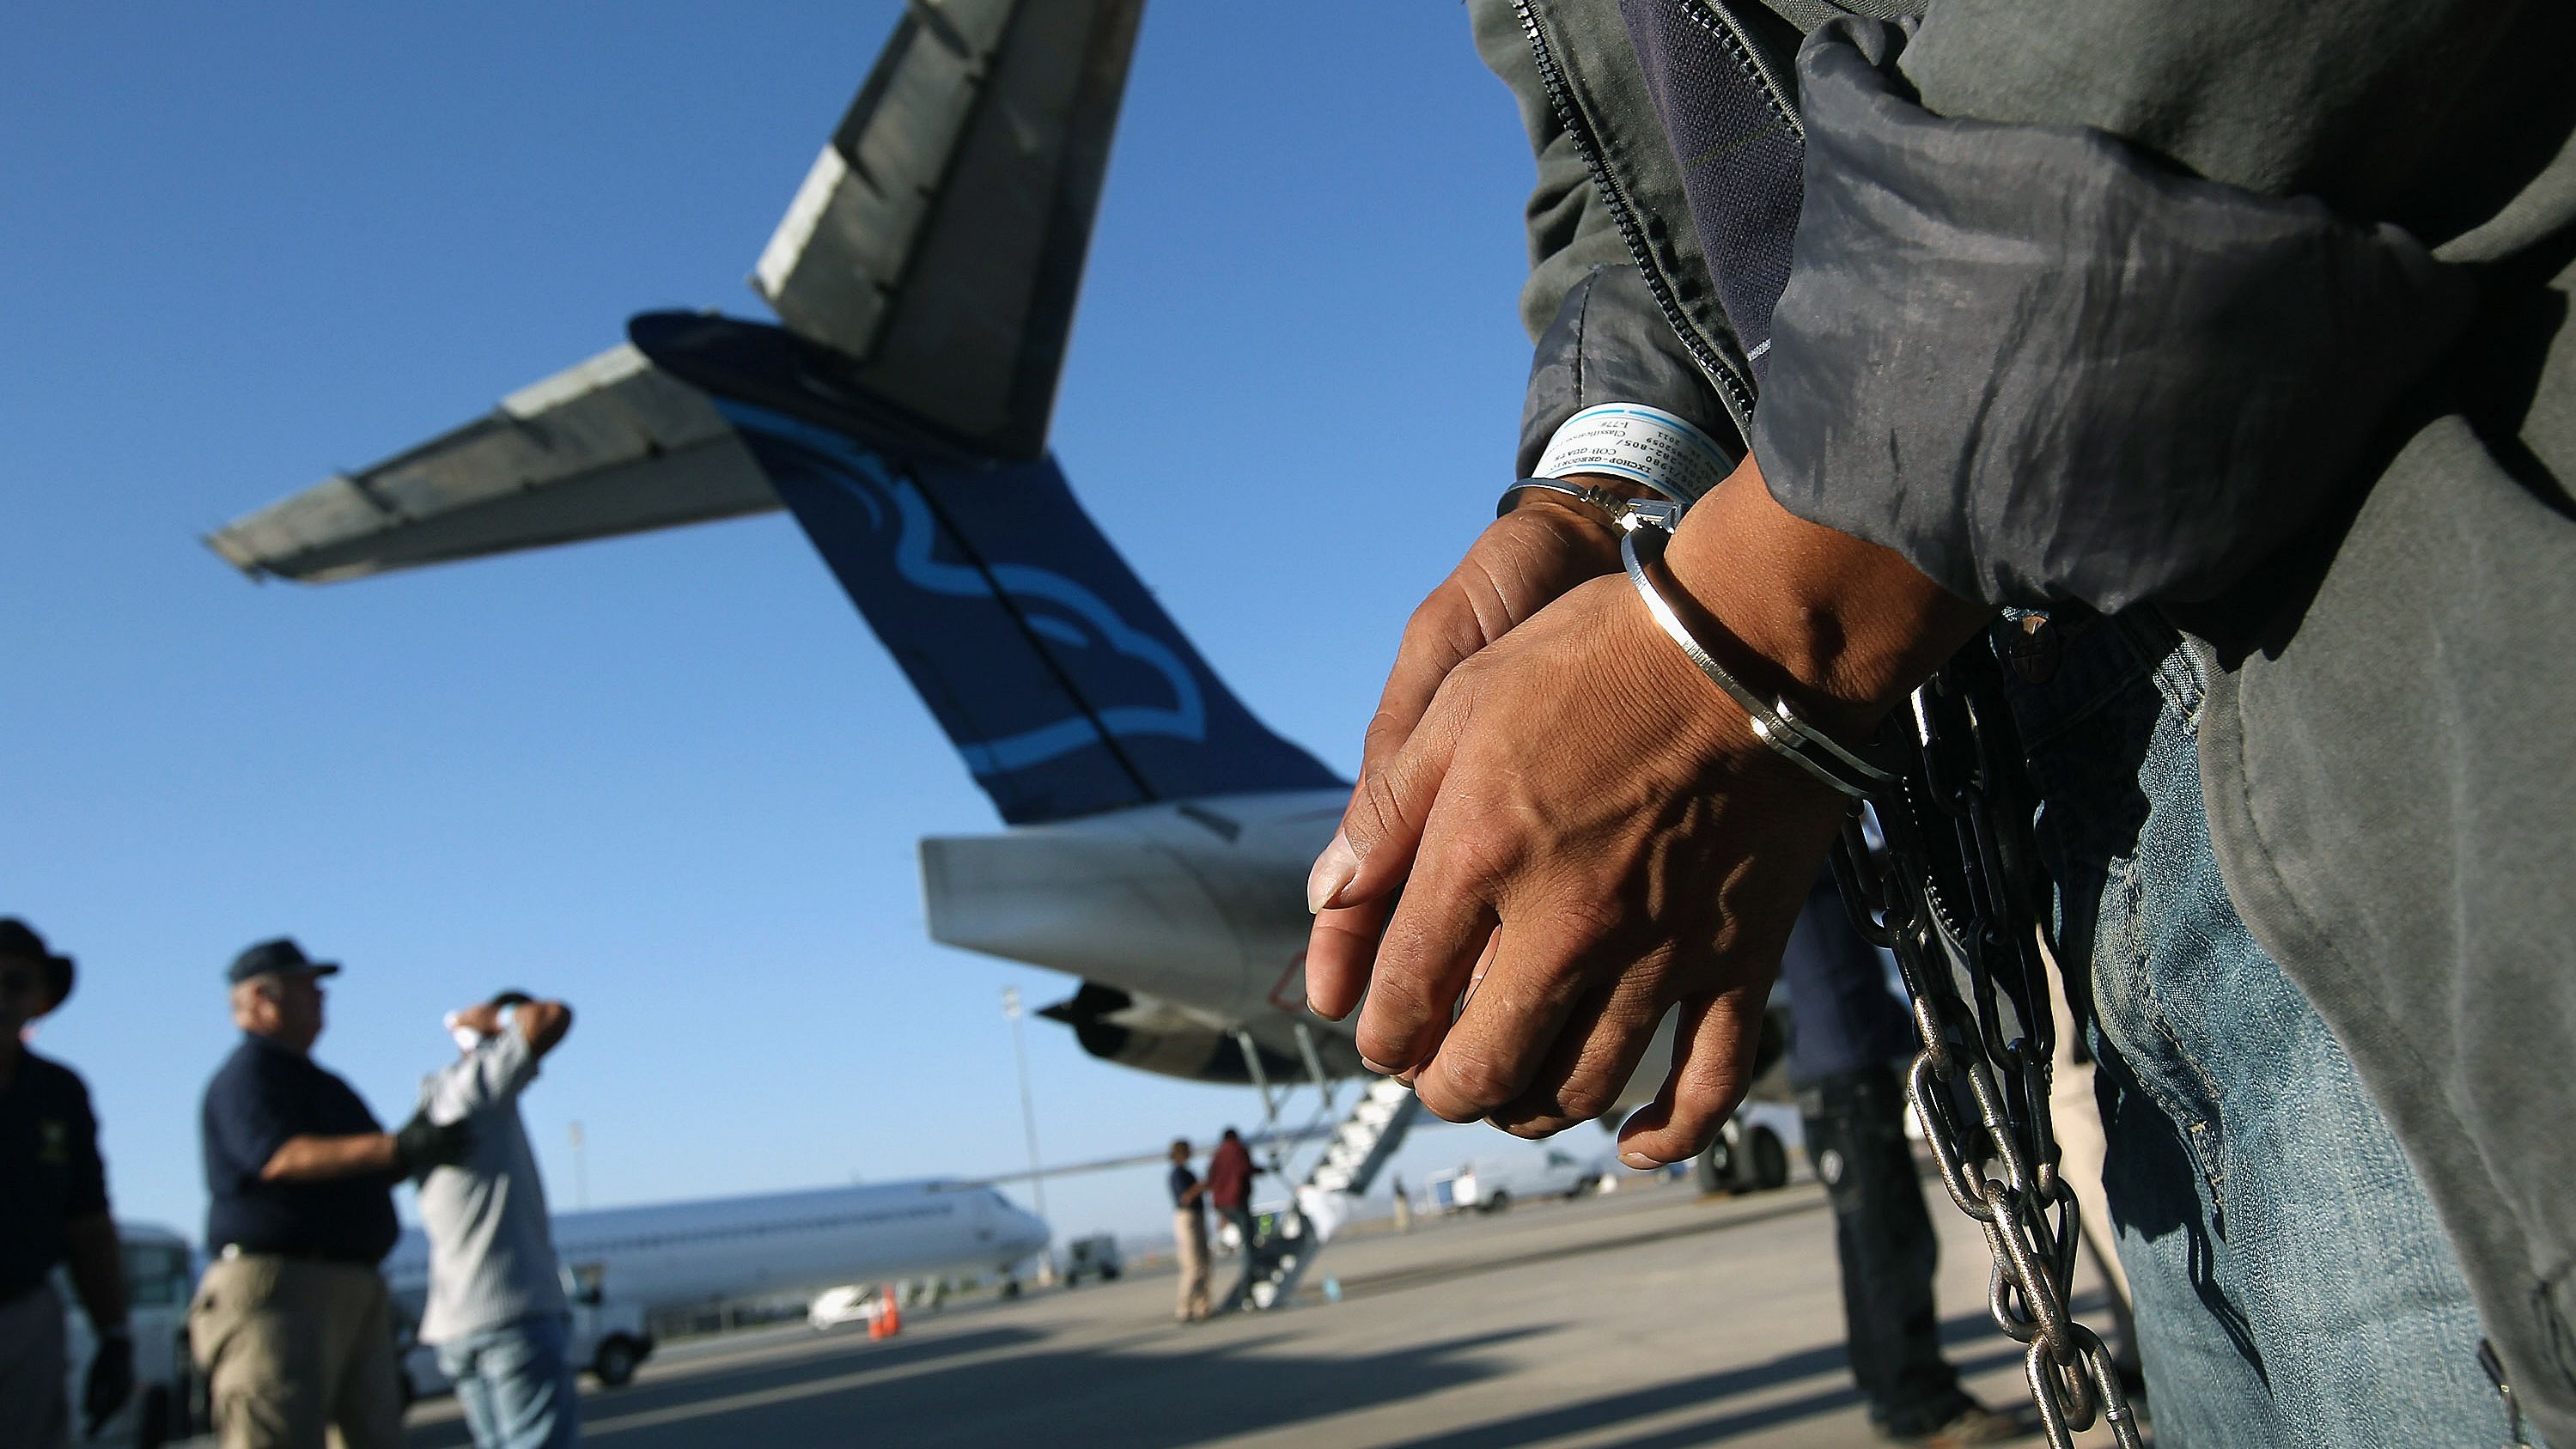 An undocumented Guatemalan charged as a criminal prepares to board a deportation flight in Mesa, Arizona, this summer.